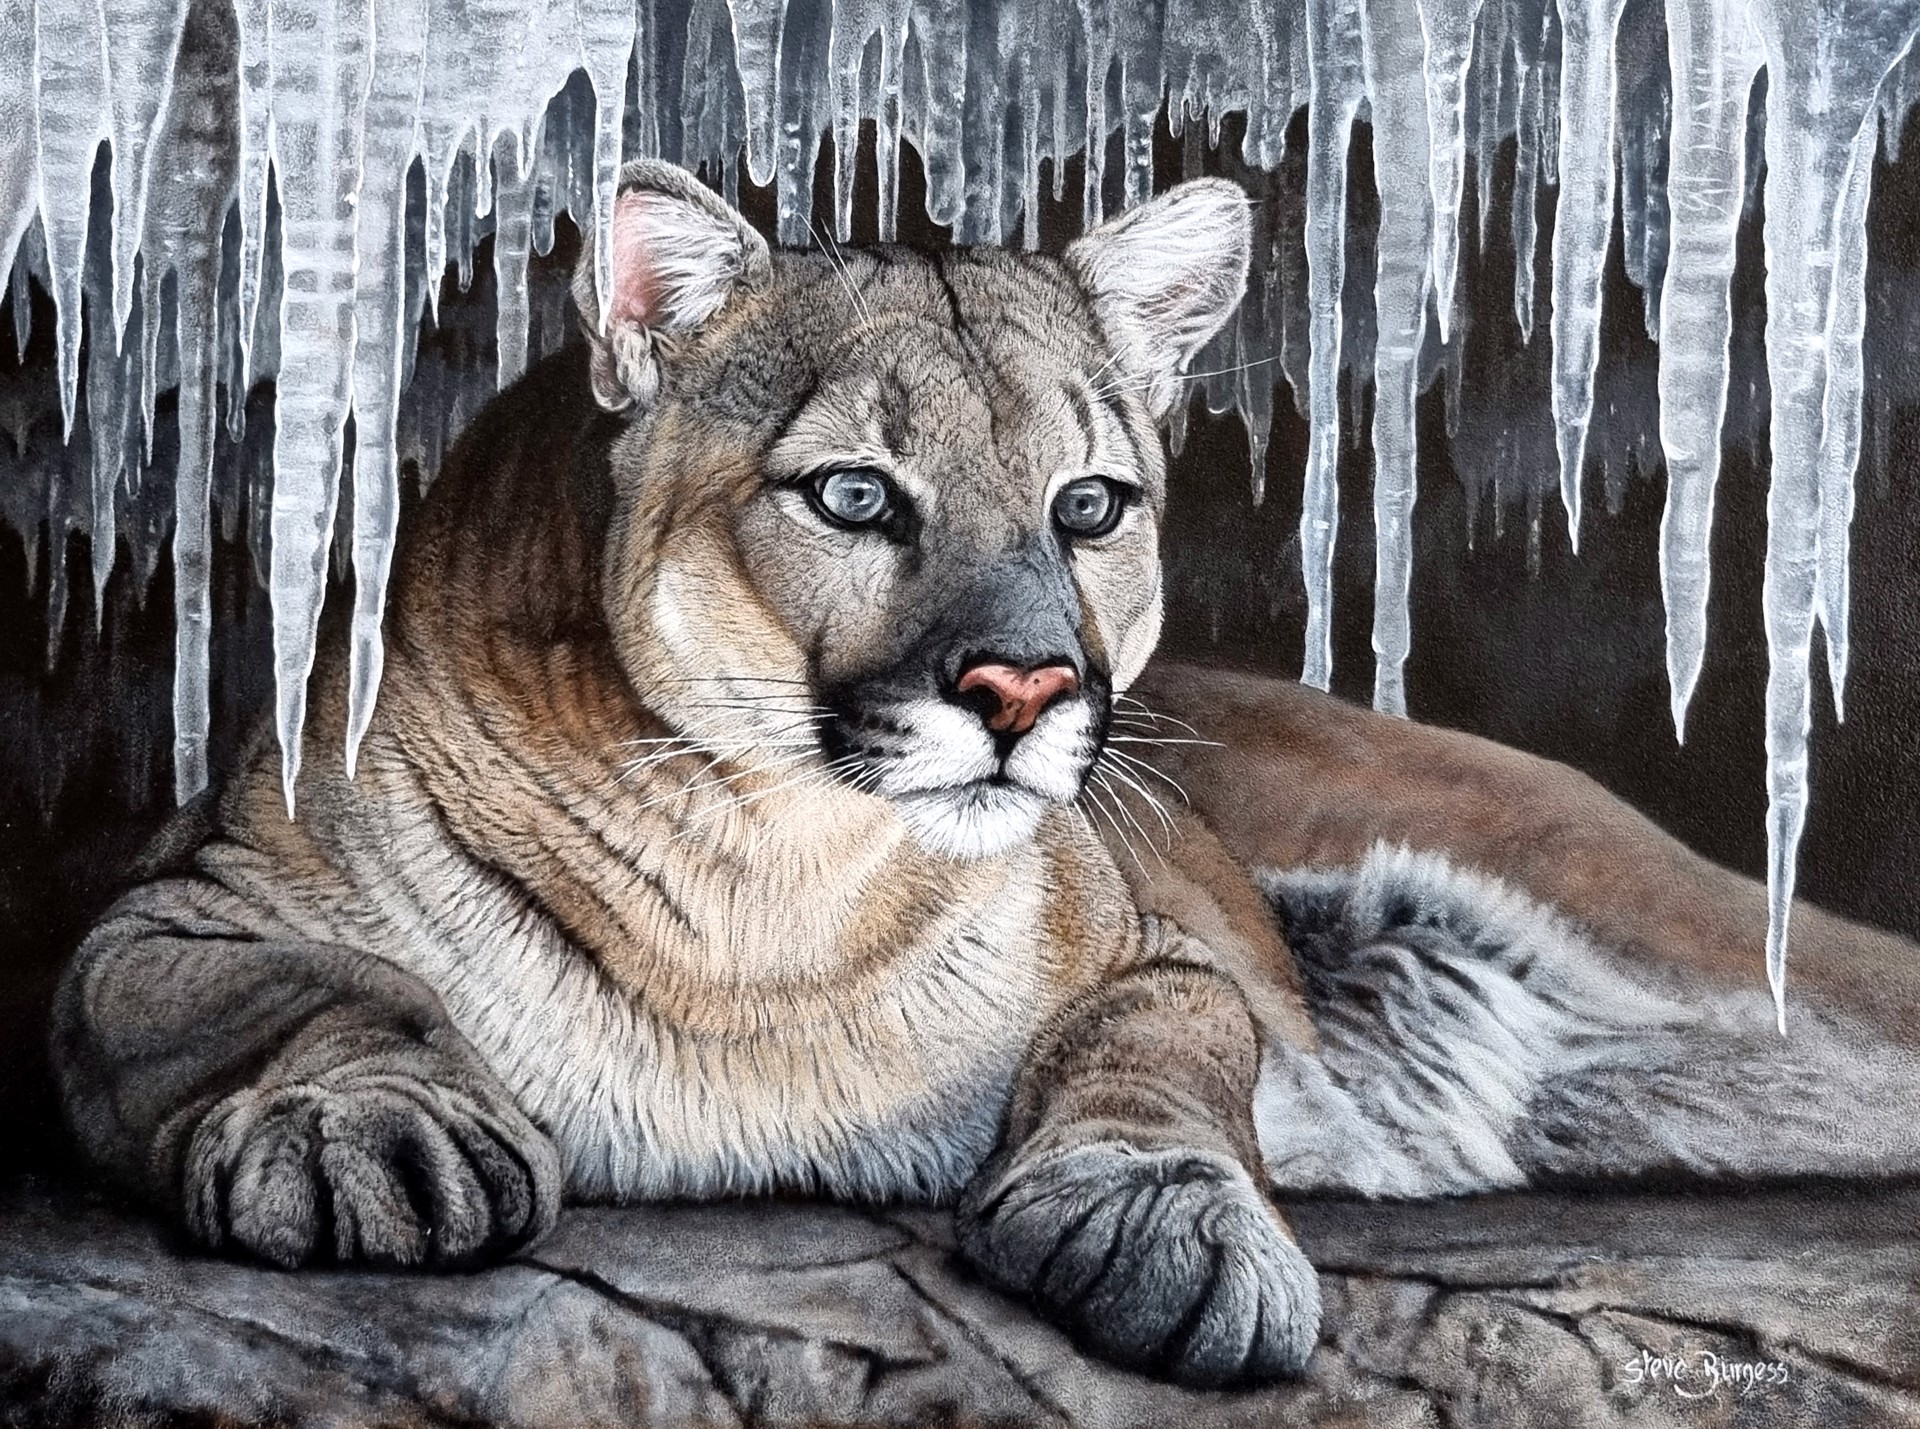 An Icy Stare by Steve Burgess